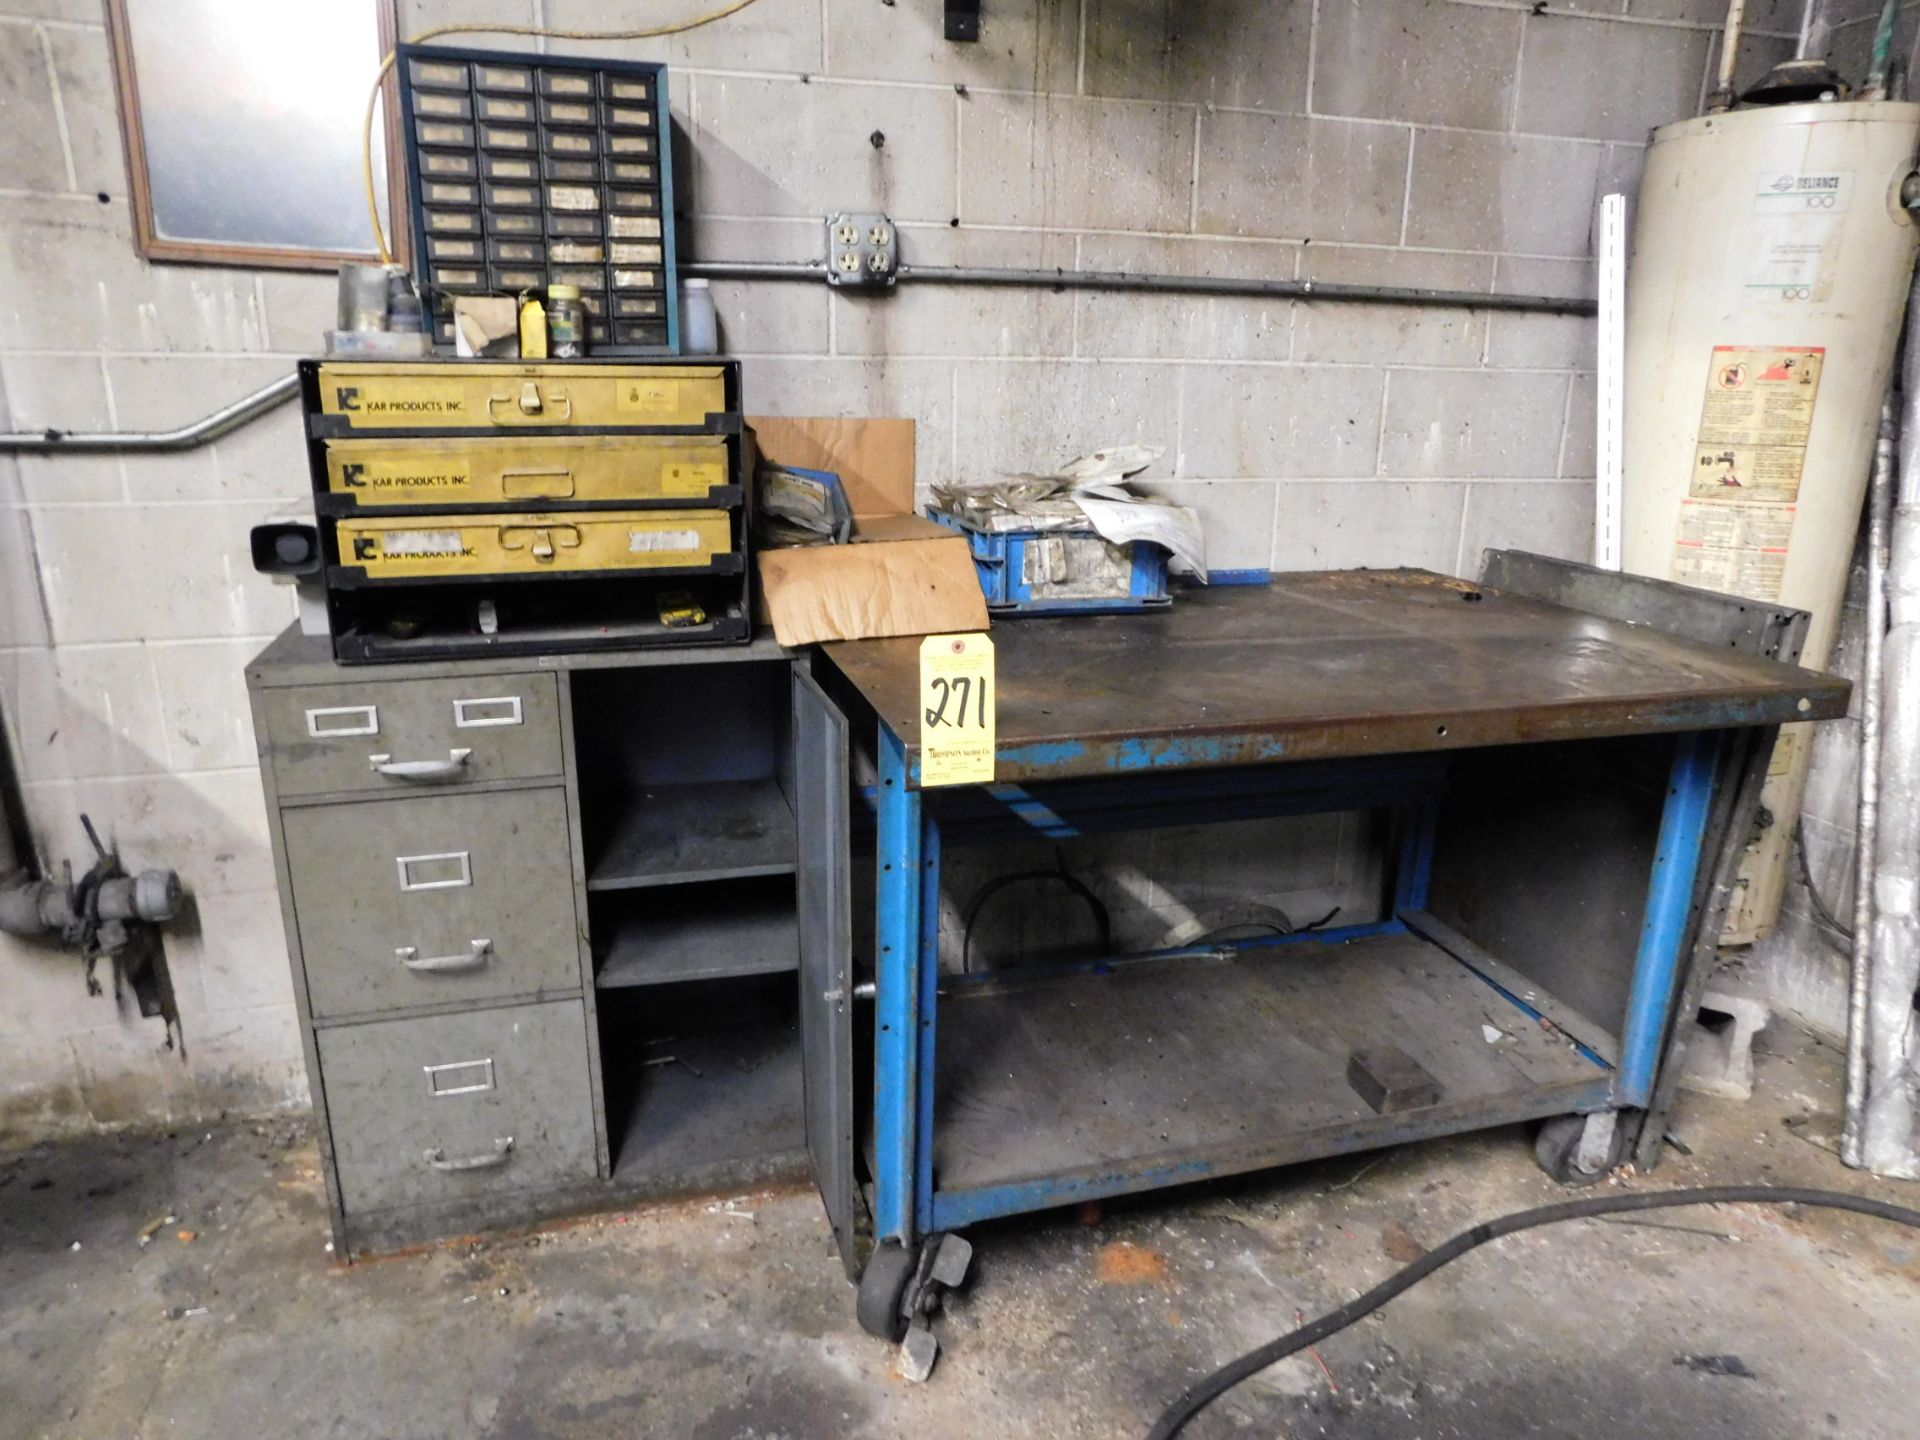 Workbench on Casters, Cabinet, and Kar Products Parts Cabinet